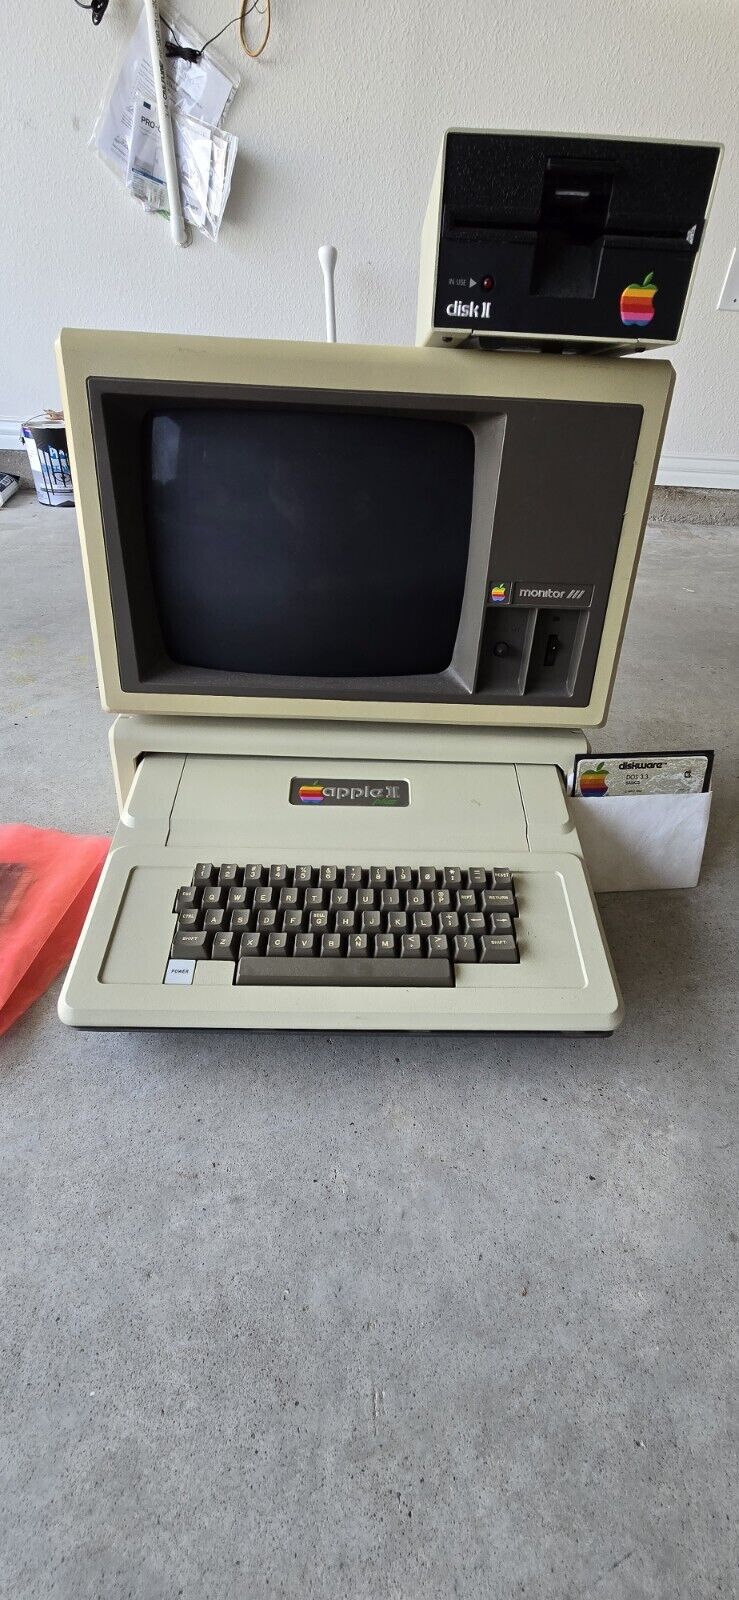 Vintage Apple II Plus with Monitor III, Expansion Cards And Drive